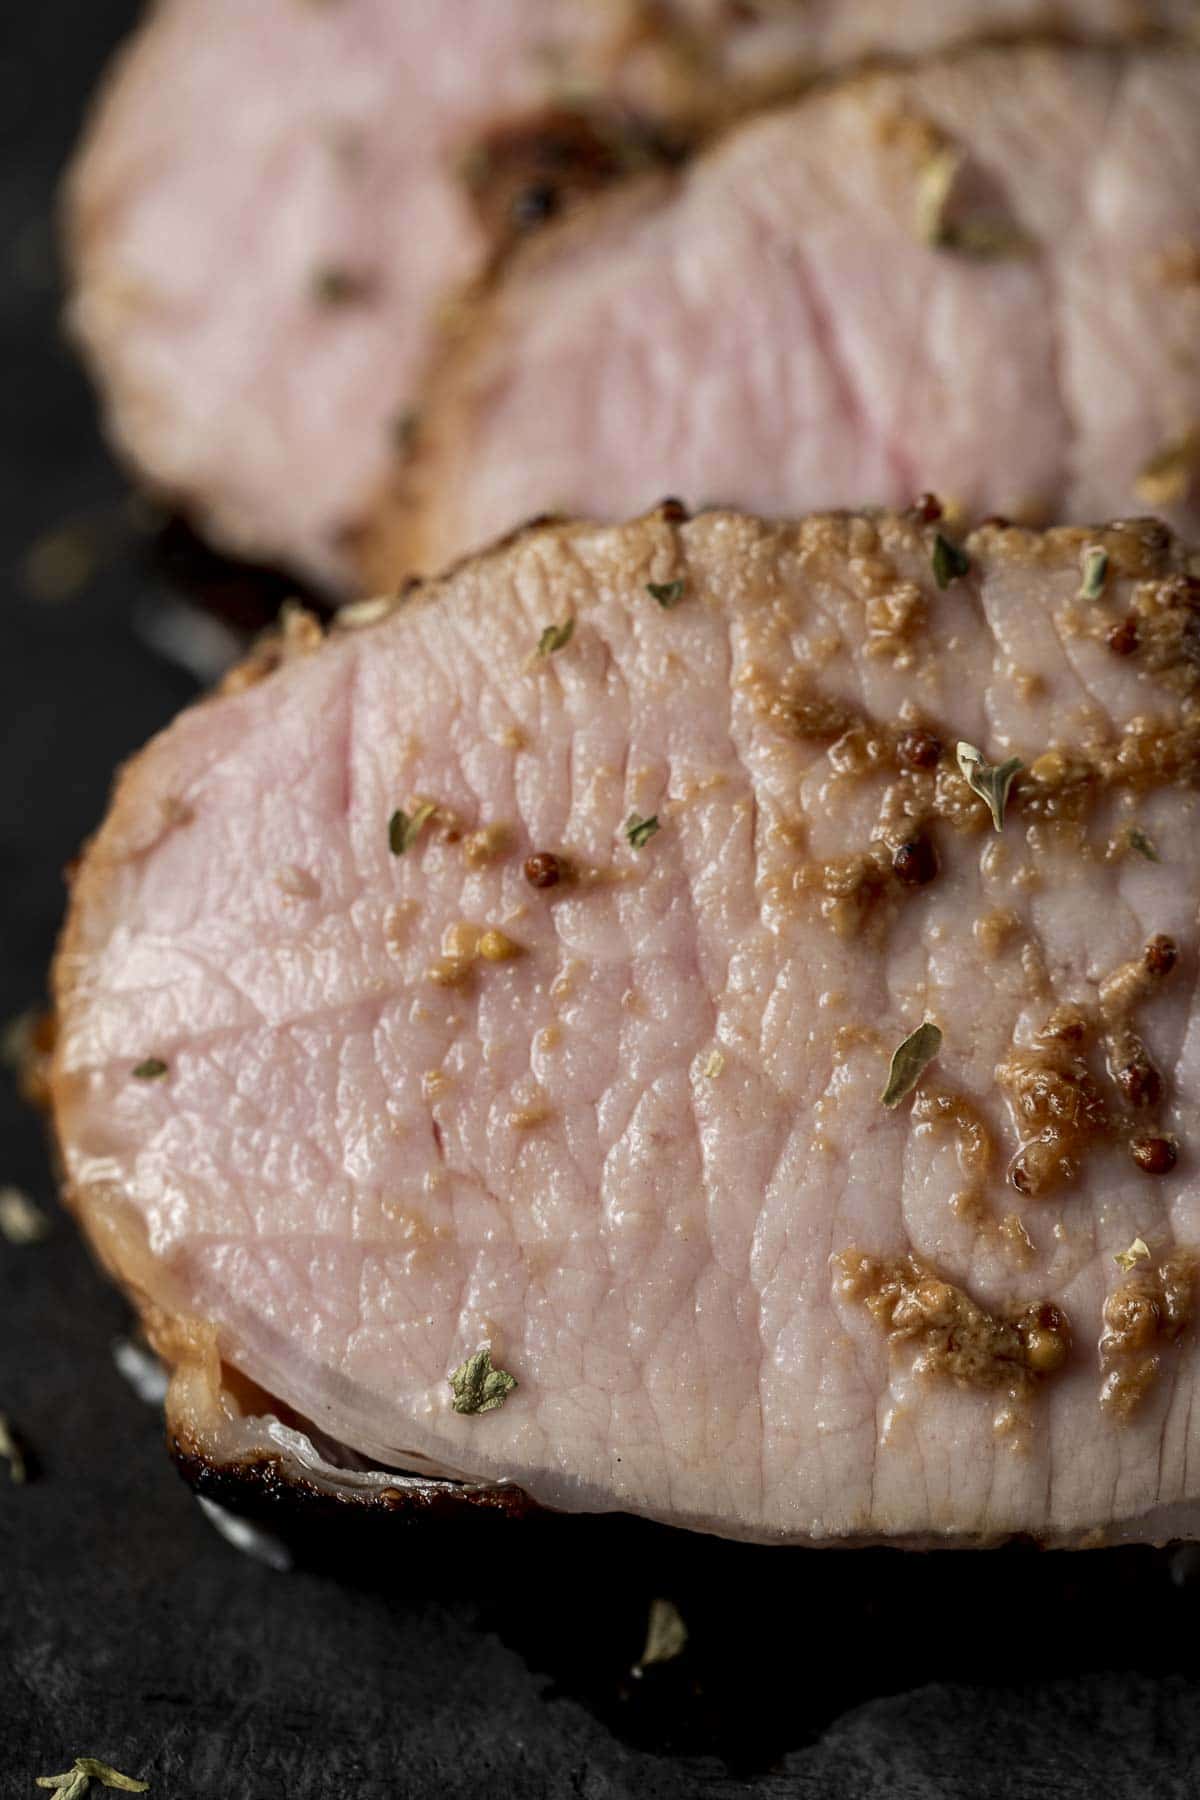 Close up view of a slice of juicy pork roast.